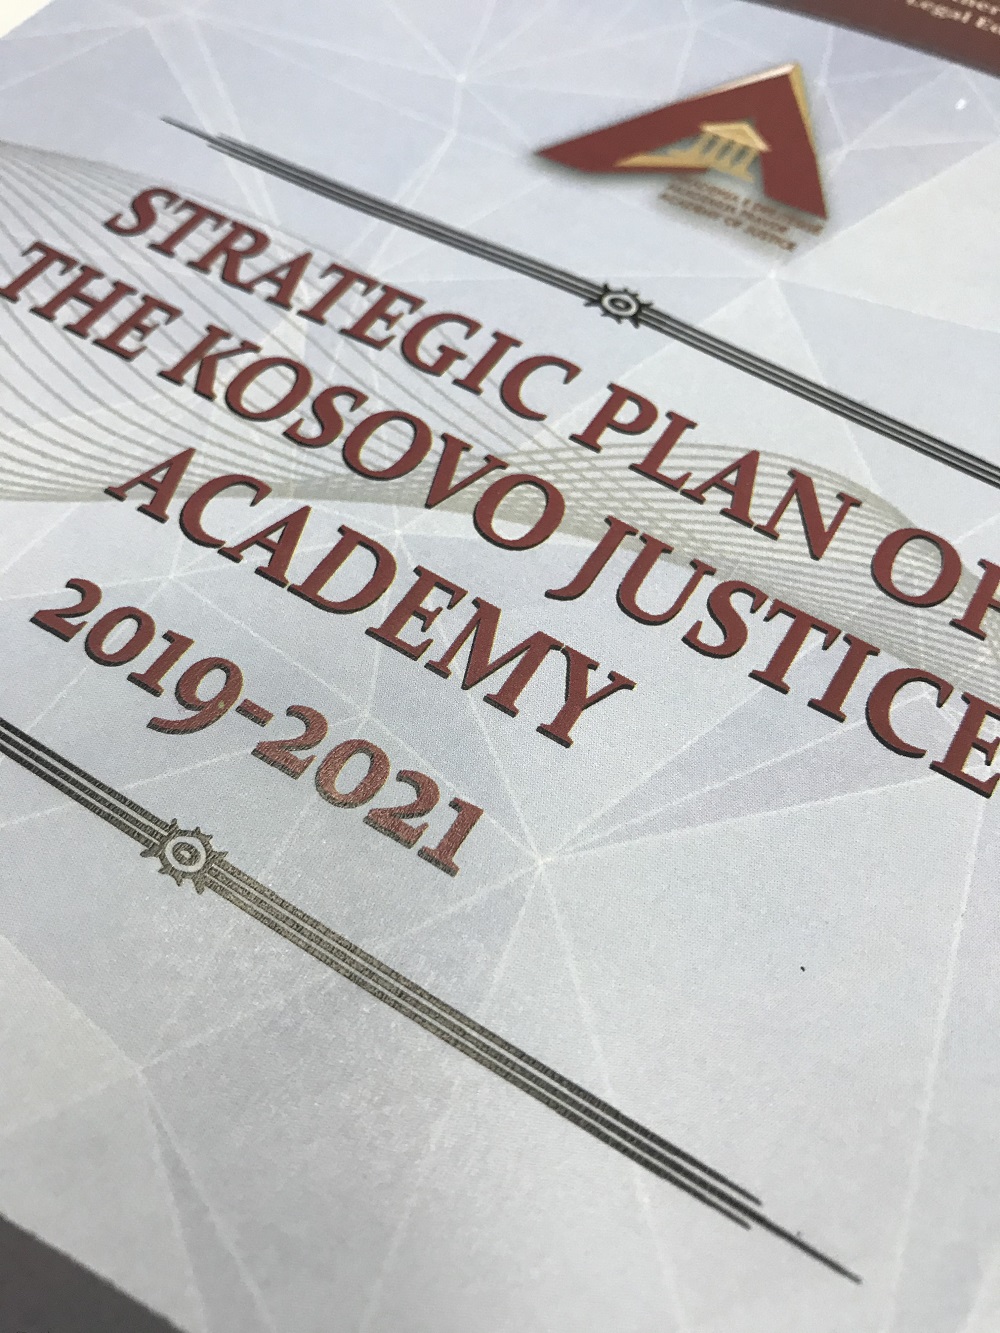 Improving the training curricula of the Justice Academy in Kosovo* with CEPEJ standards